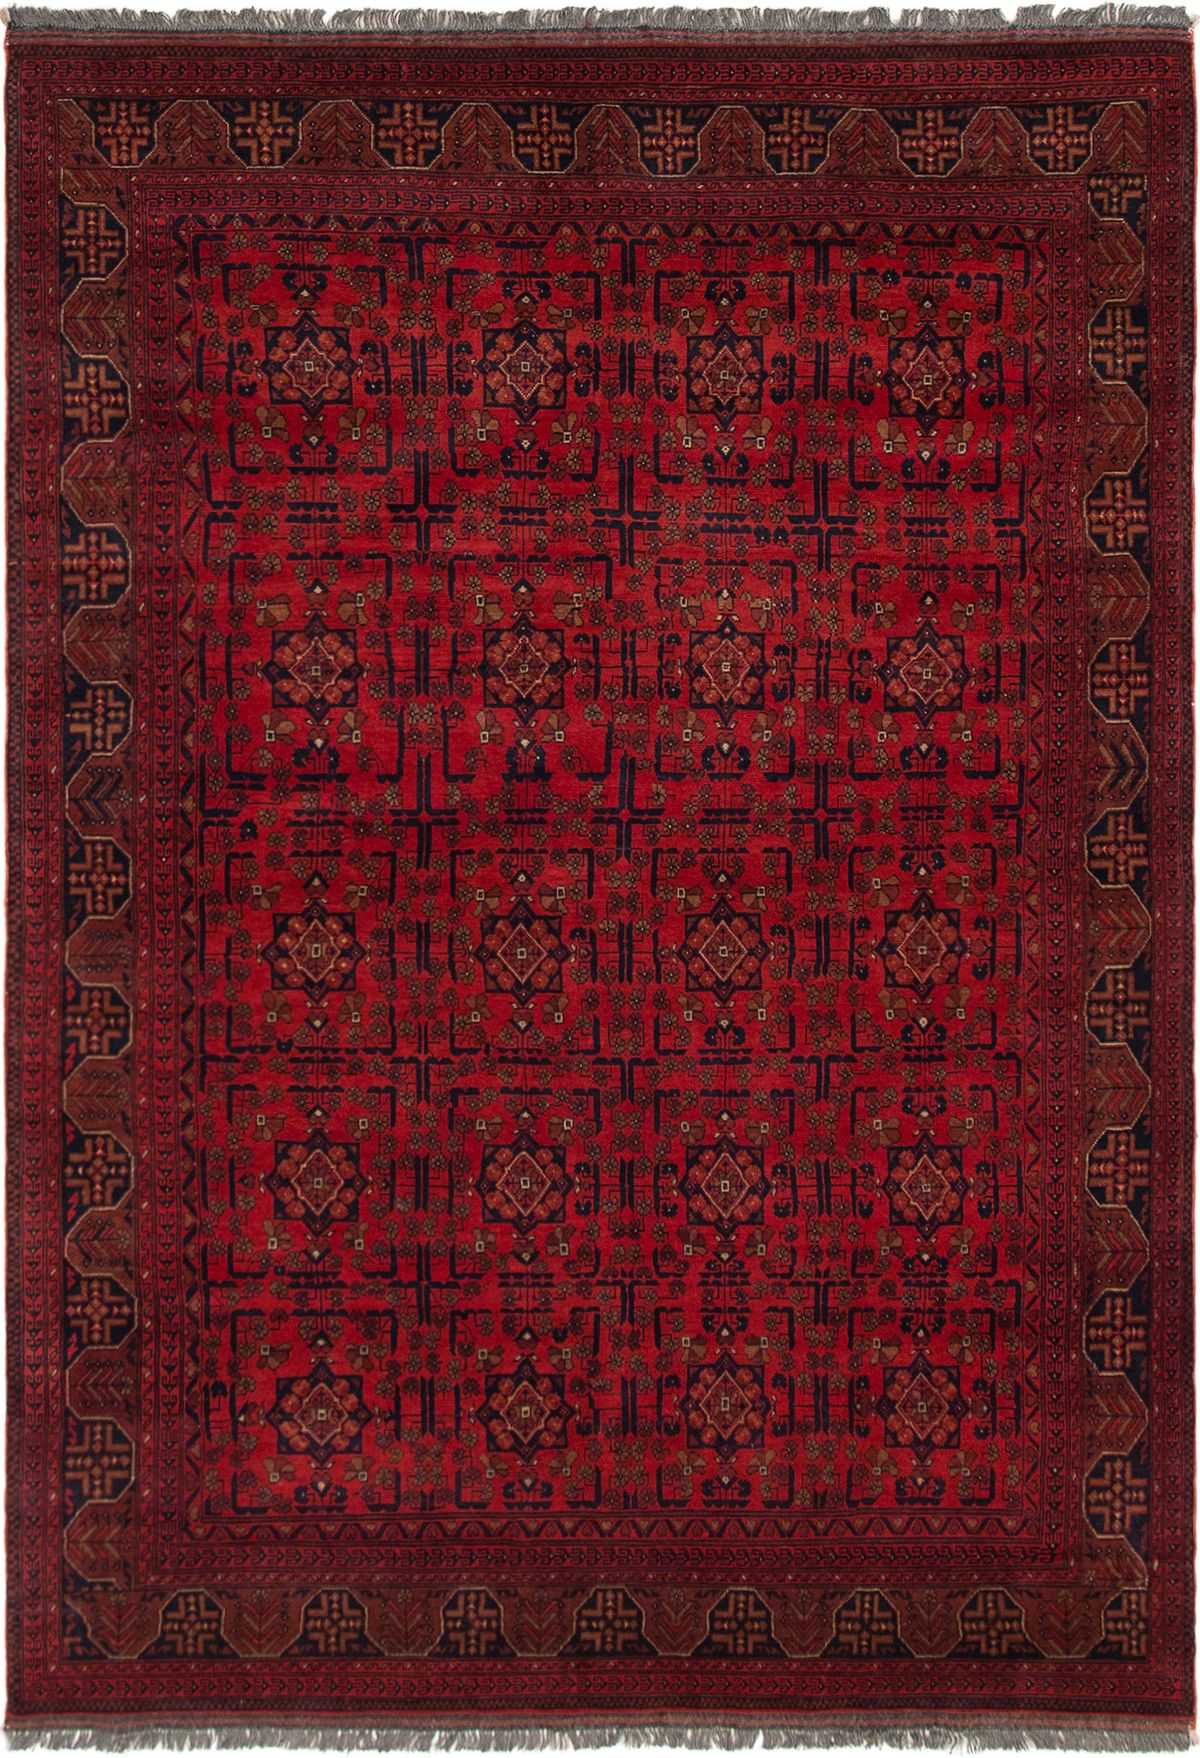 Hand-knotted Finest Khal Mohammadi Red Wool Rug 6'7" x 9'5"  Size: 6'7" x 9'5"  